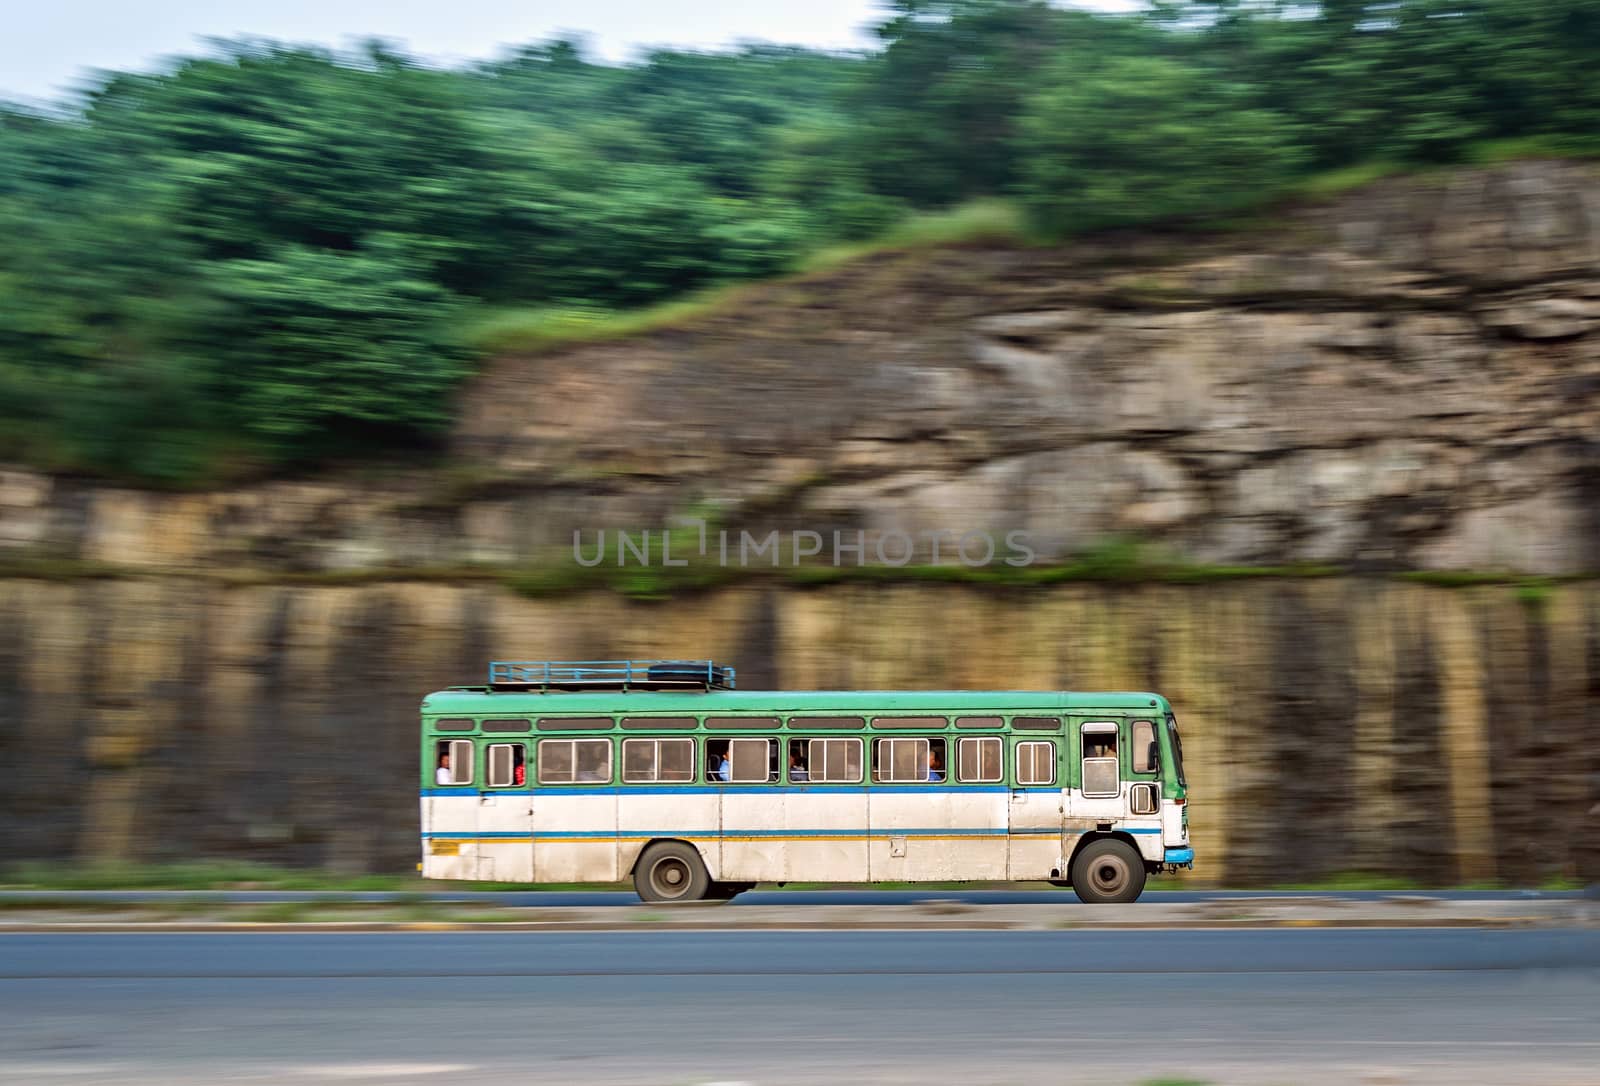 Isolated , slow shutter speed panning image of a speeding bus on highway.